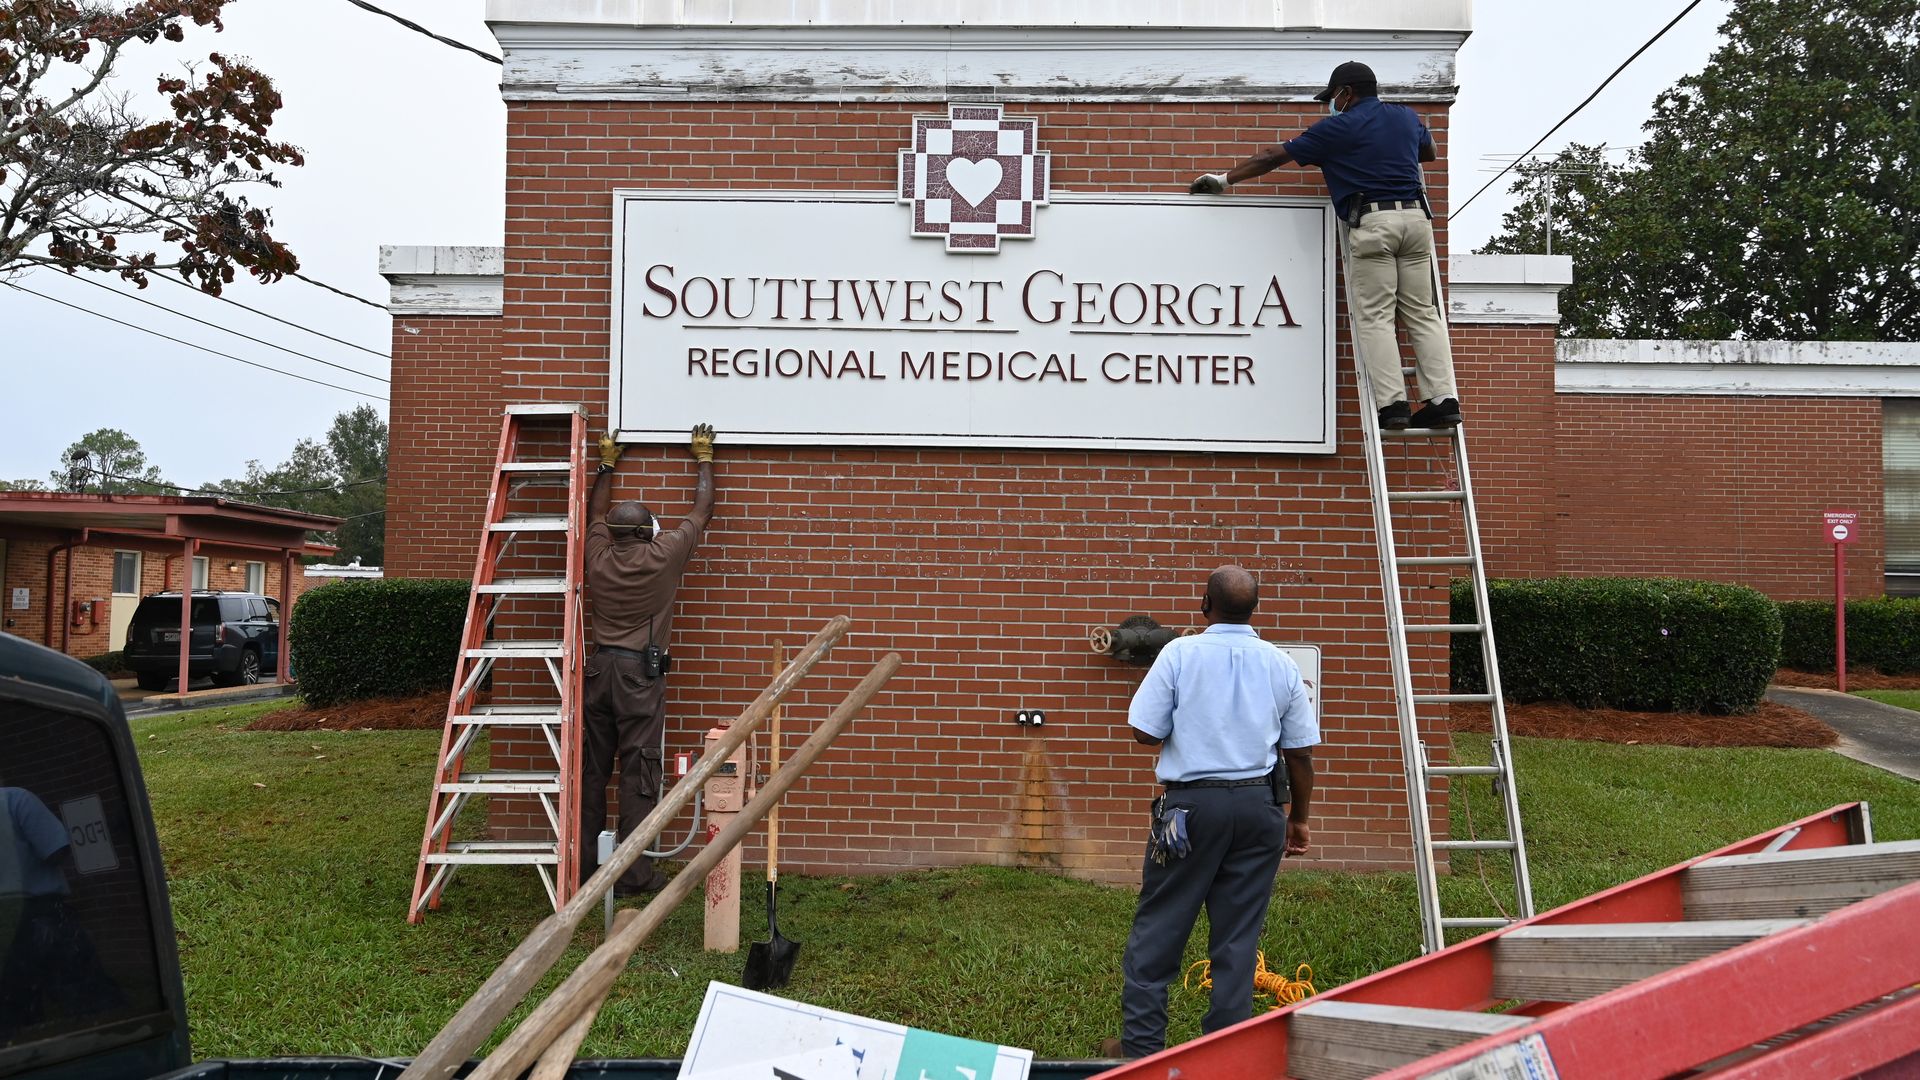 Men on ladders take down a hospital sign